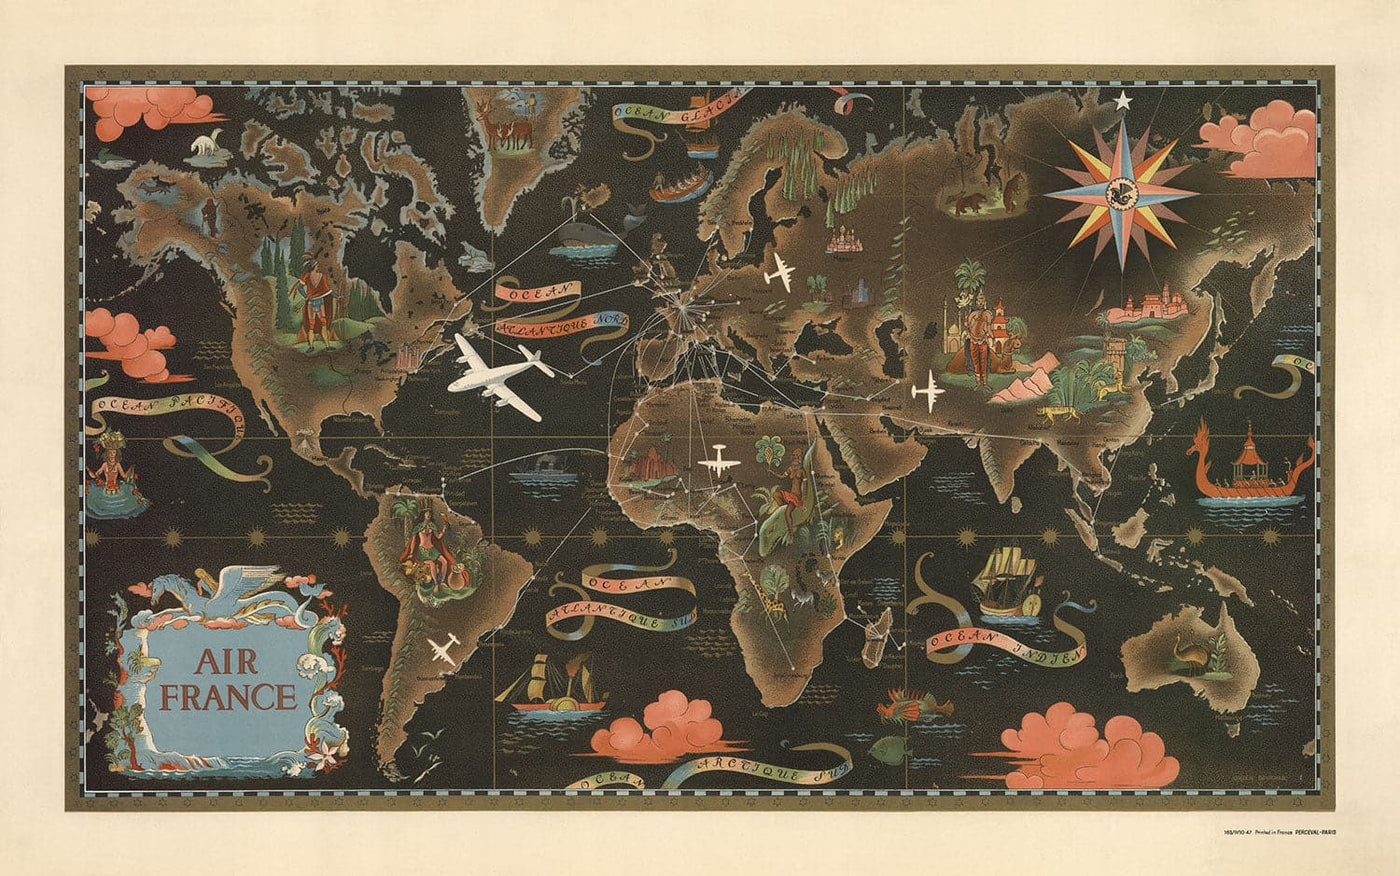 Old Air France World Map, 1947 by Lucien Boucher - Large Aircraft Route Wall Chart - Historical Airline Art